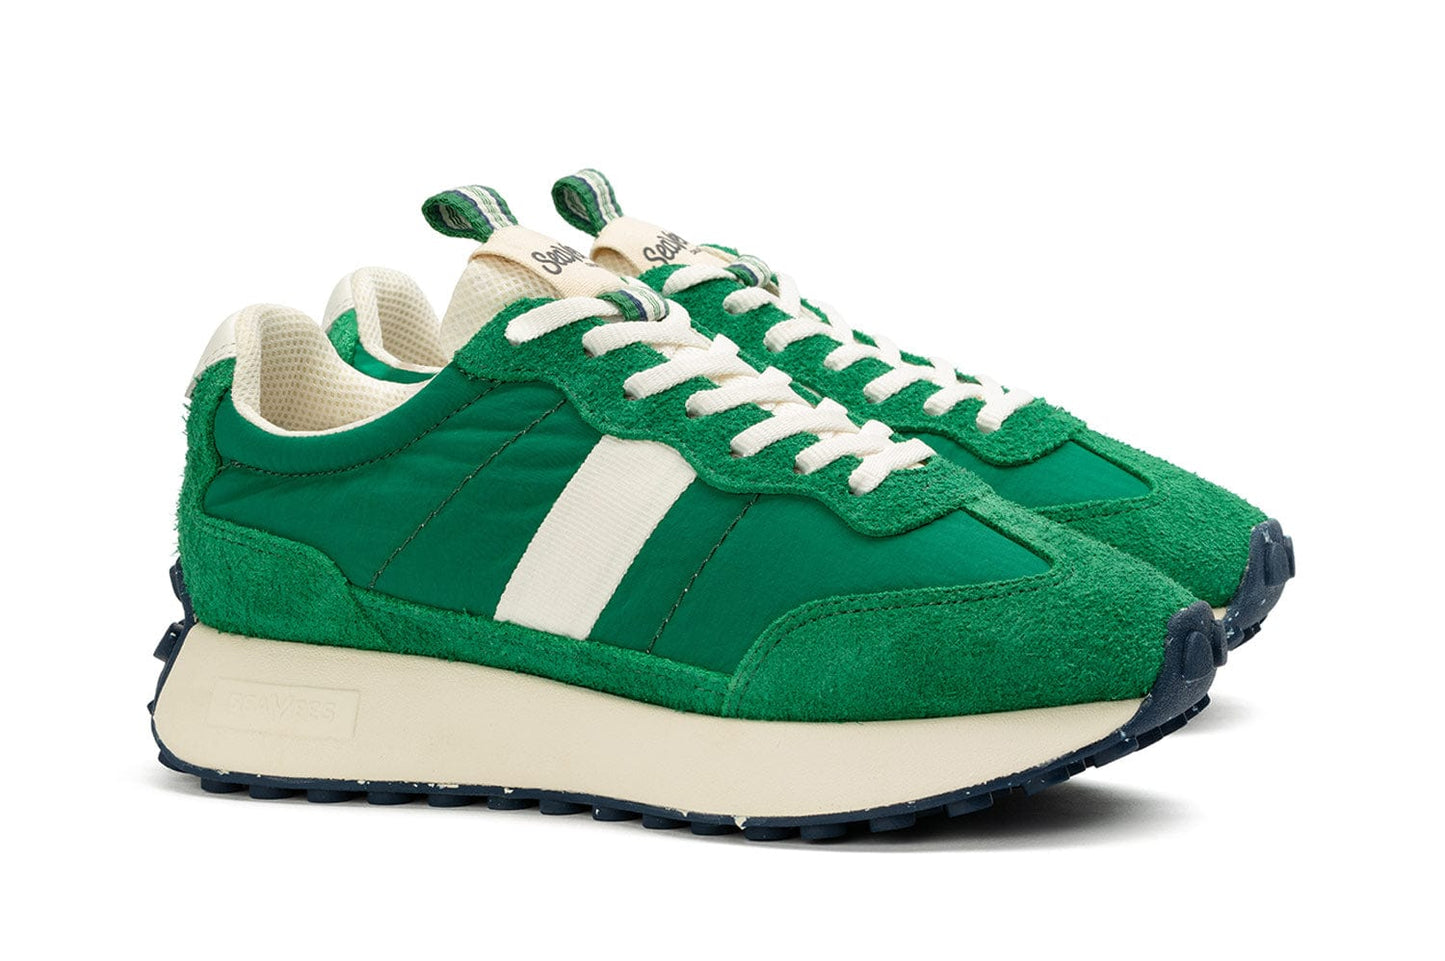 Angled front view of the Acorn Trainer in the color Grass Green, showcasing the side detailing, pull tab, and white laces.